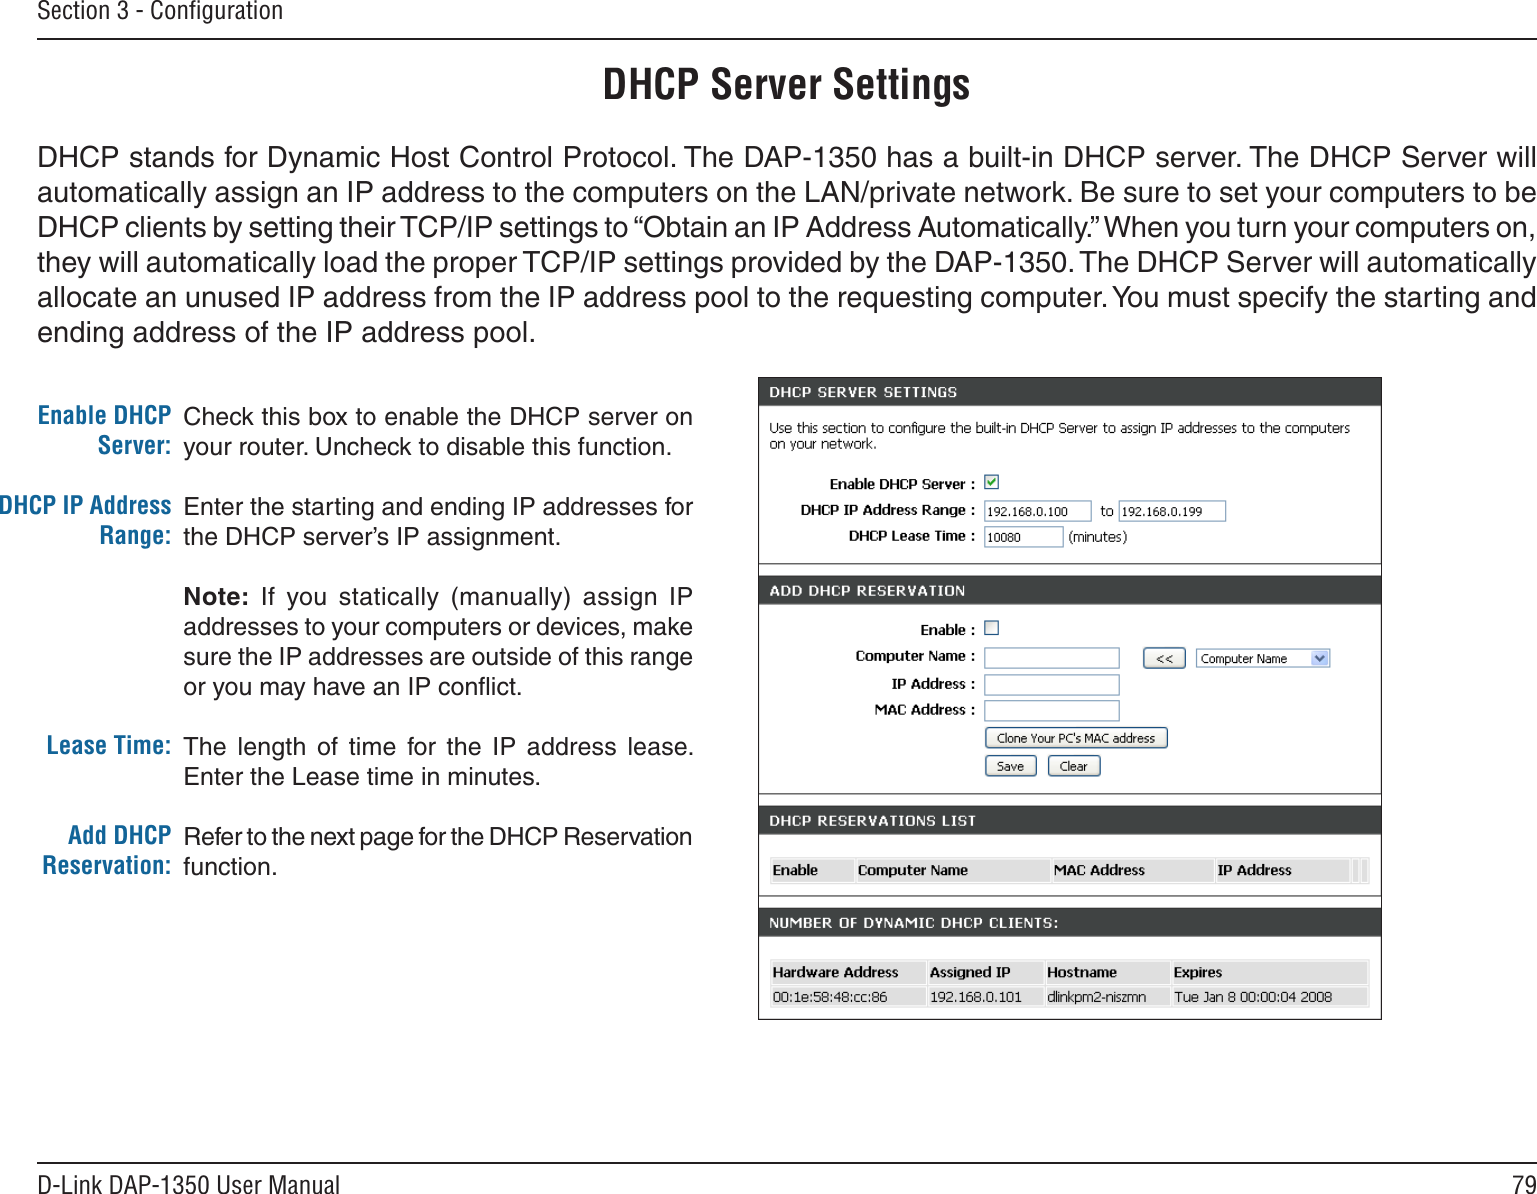 79D-Link DAP-1350 User ManualSection 3 - ConﬁgurationCheck this box to enable the DHCP server on your router. Uncheck to disable this function.Enter the starting and ending IP addresses for the DHCP server’s IP assignment.Note:  If  you statically  (manually)  assign  IP addresses to your computers or devices, make sure the IP addresses are outside of this range or you may have an IP conﬂict. The  length  of  time  for  the  IP  address  lease. Enter the Lease time in minutes.Refer to the next page for the DHCP Reservation function.Enable DHCP Server:DHCP IP Address Range:Lease Time:Add DHCP Reservation:DHCP Server SettingsDHCP stands for Dynamic Host Control Protocol. The DAP-1350 has a built-in DHCP server. The DHCP Server will automatically assign an IP address to the computers on the LAN/private network. Be sure to set your computers to be DHCP clients by setting their TCP/IP settings to “Obtain an IP Address Automatically.” When you turn your computers on, they will automatically load the proper TCP/IP settings provided by the DAP-1350. The DHCP Server will automatically allocate an unused IP address from the IP address pool to the requesting computer. You must specify the starting and ending address of the IP address pool.